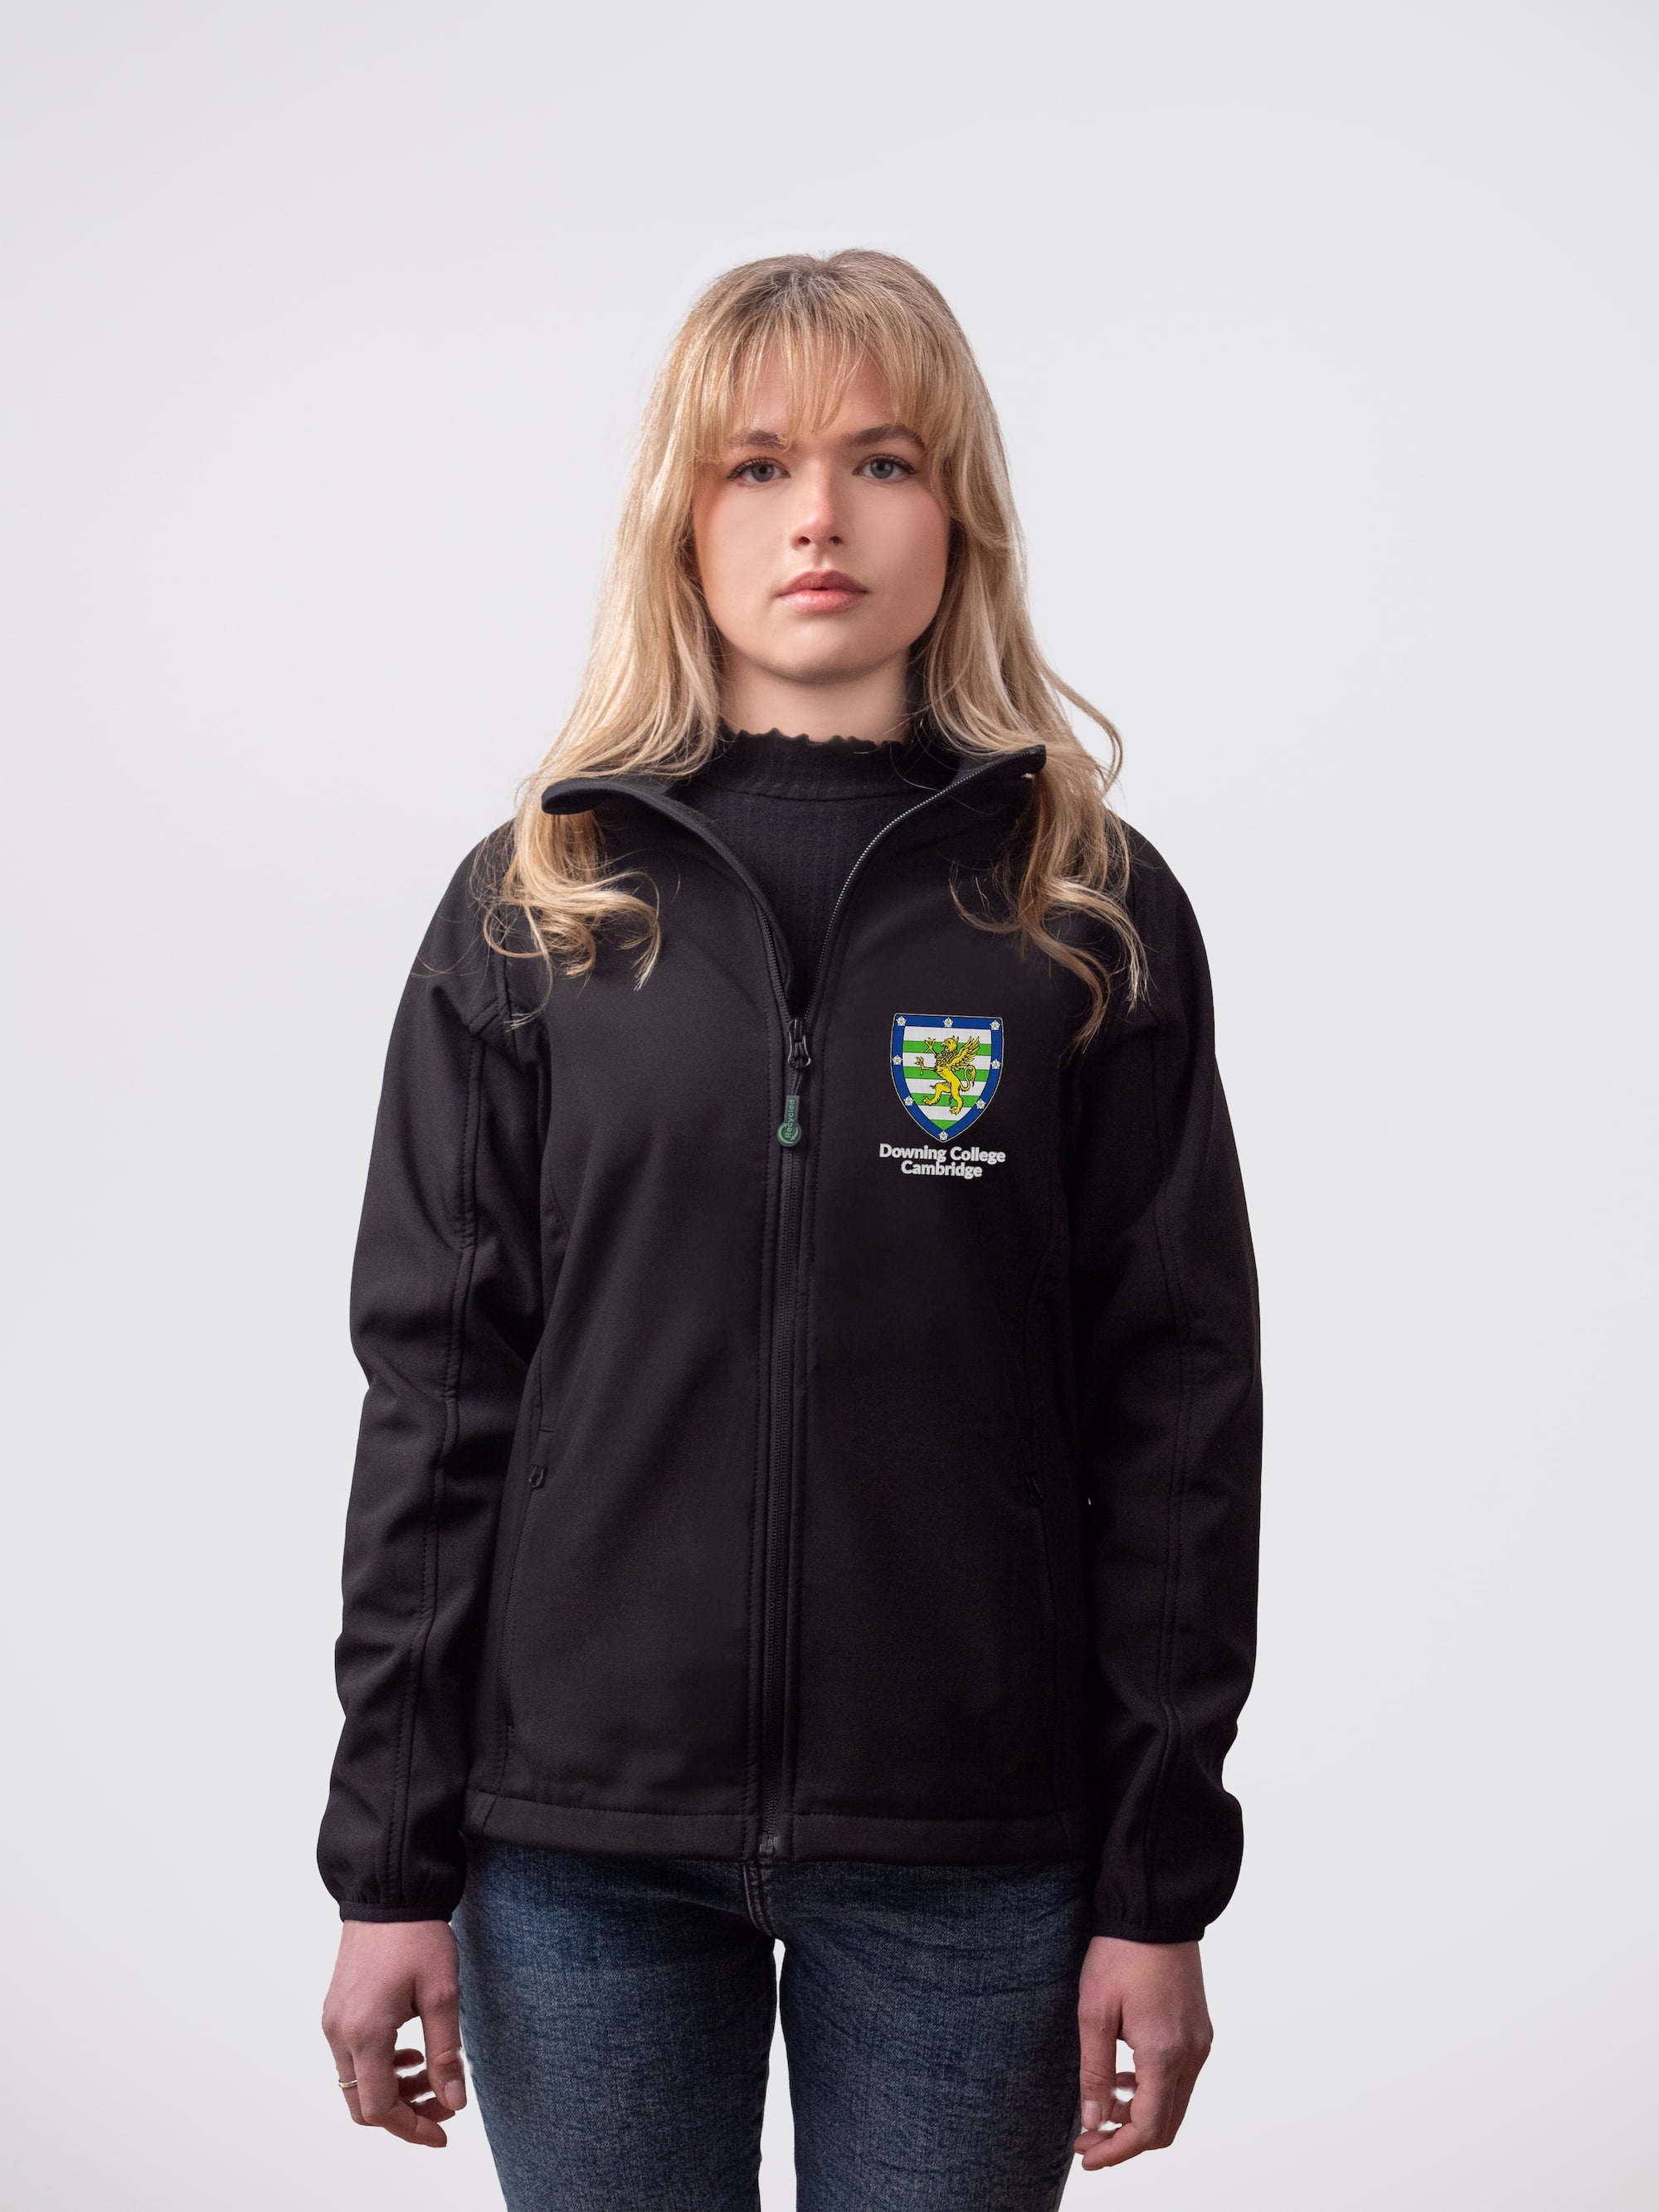 A student wearing a sustainable, Downing College embroidered jacket